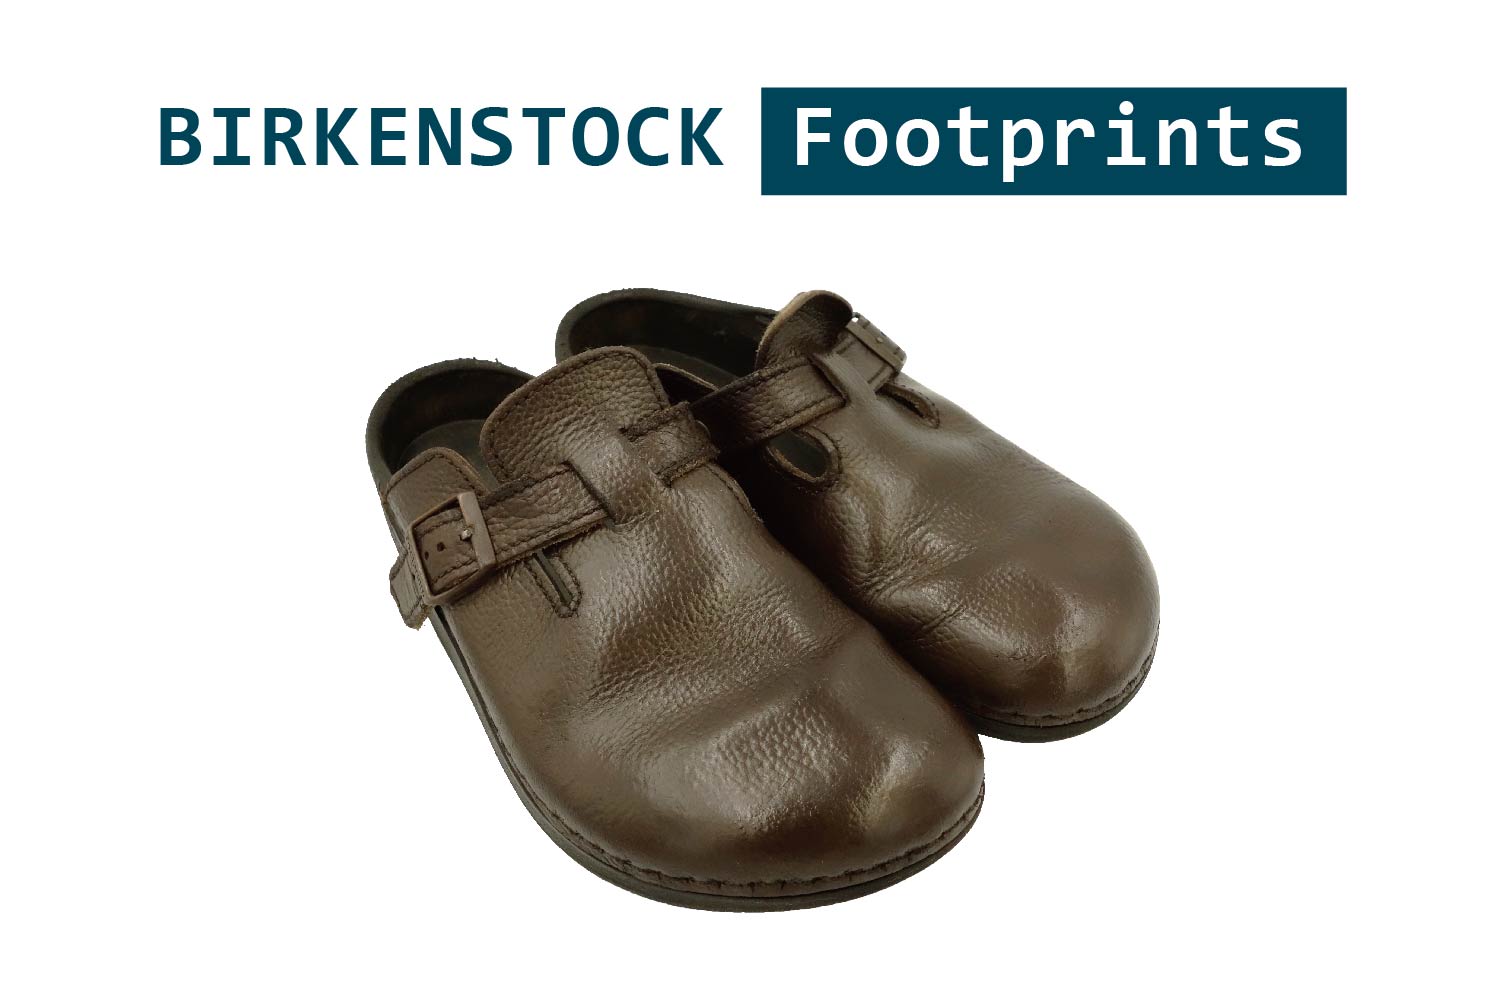 how to get footprints out of birkenstocks